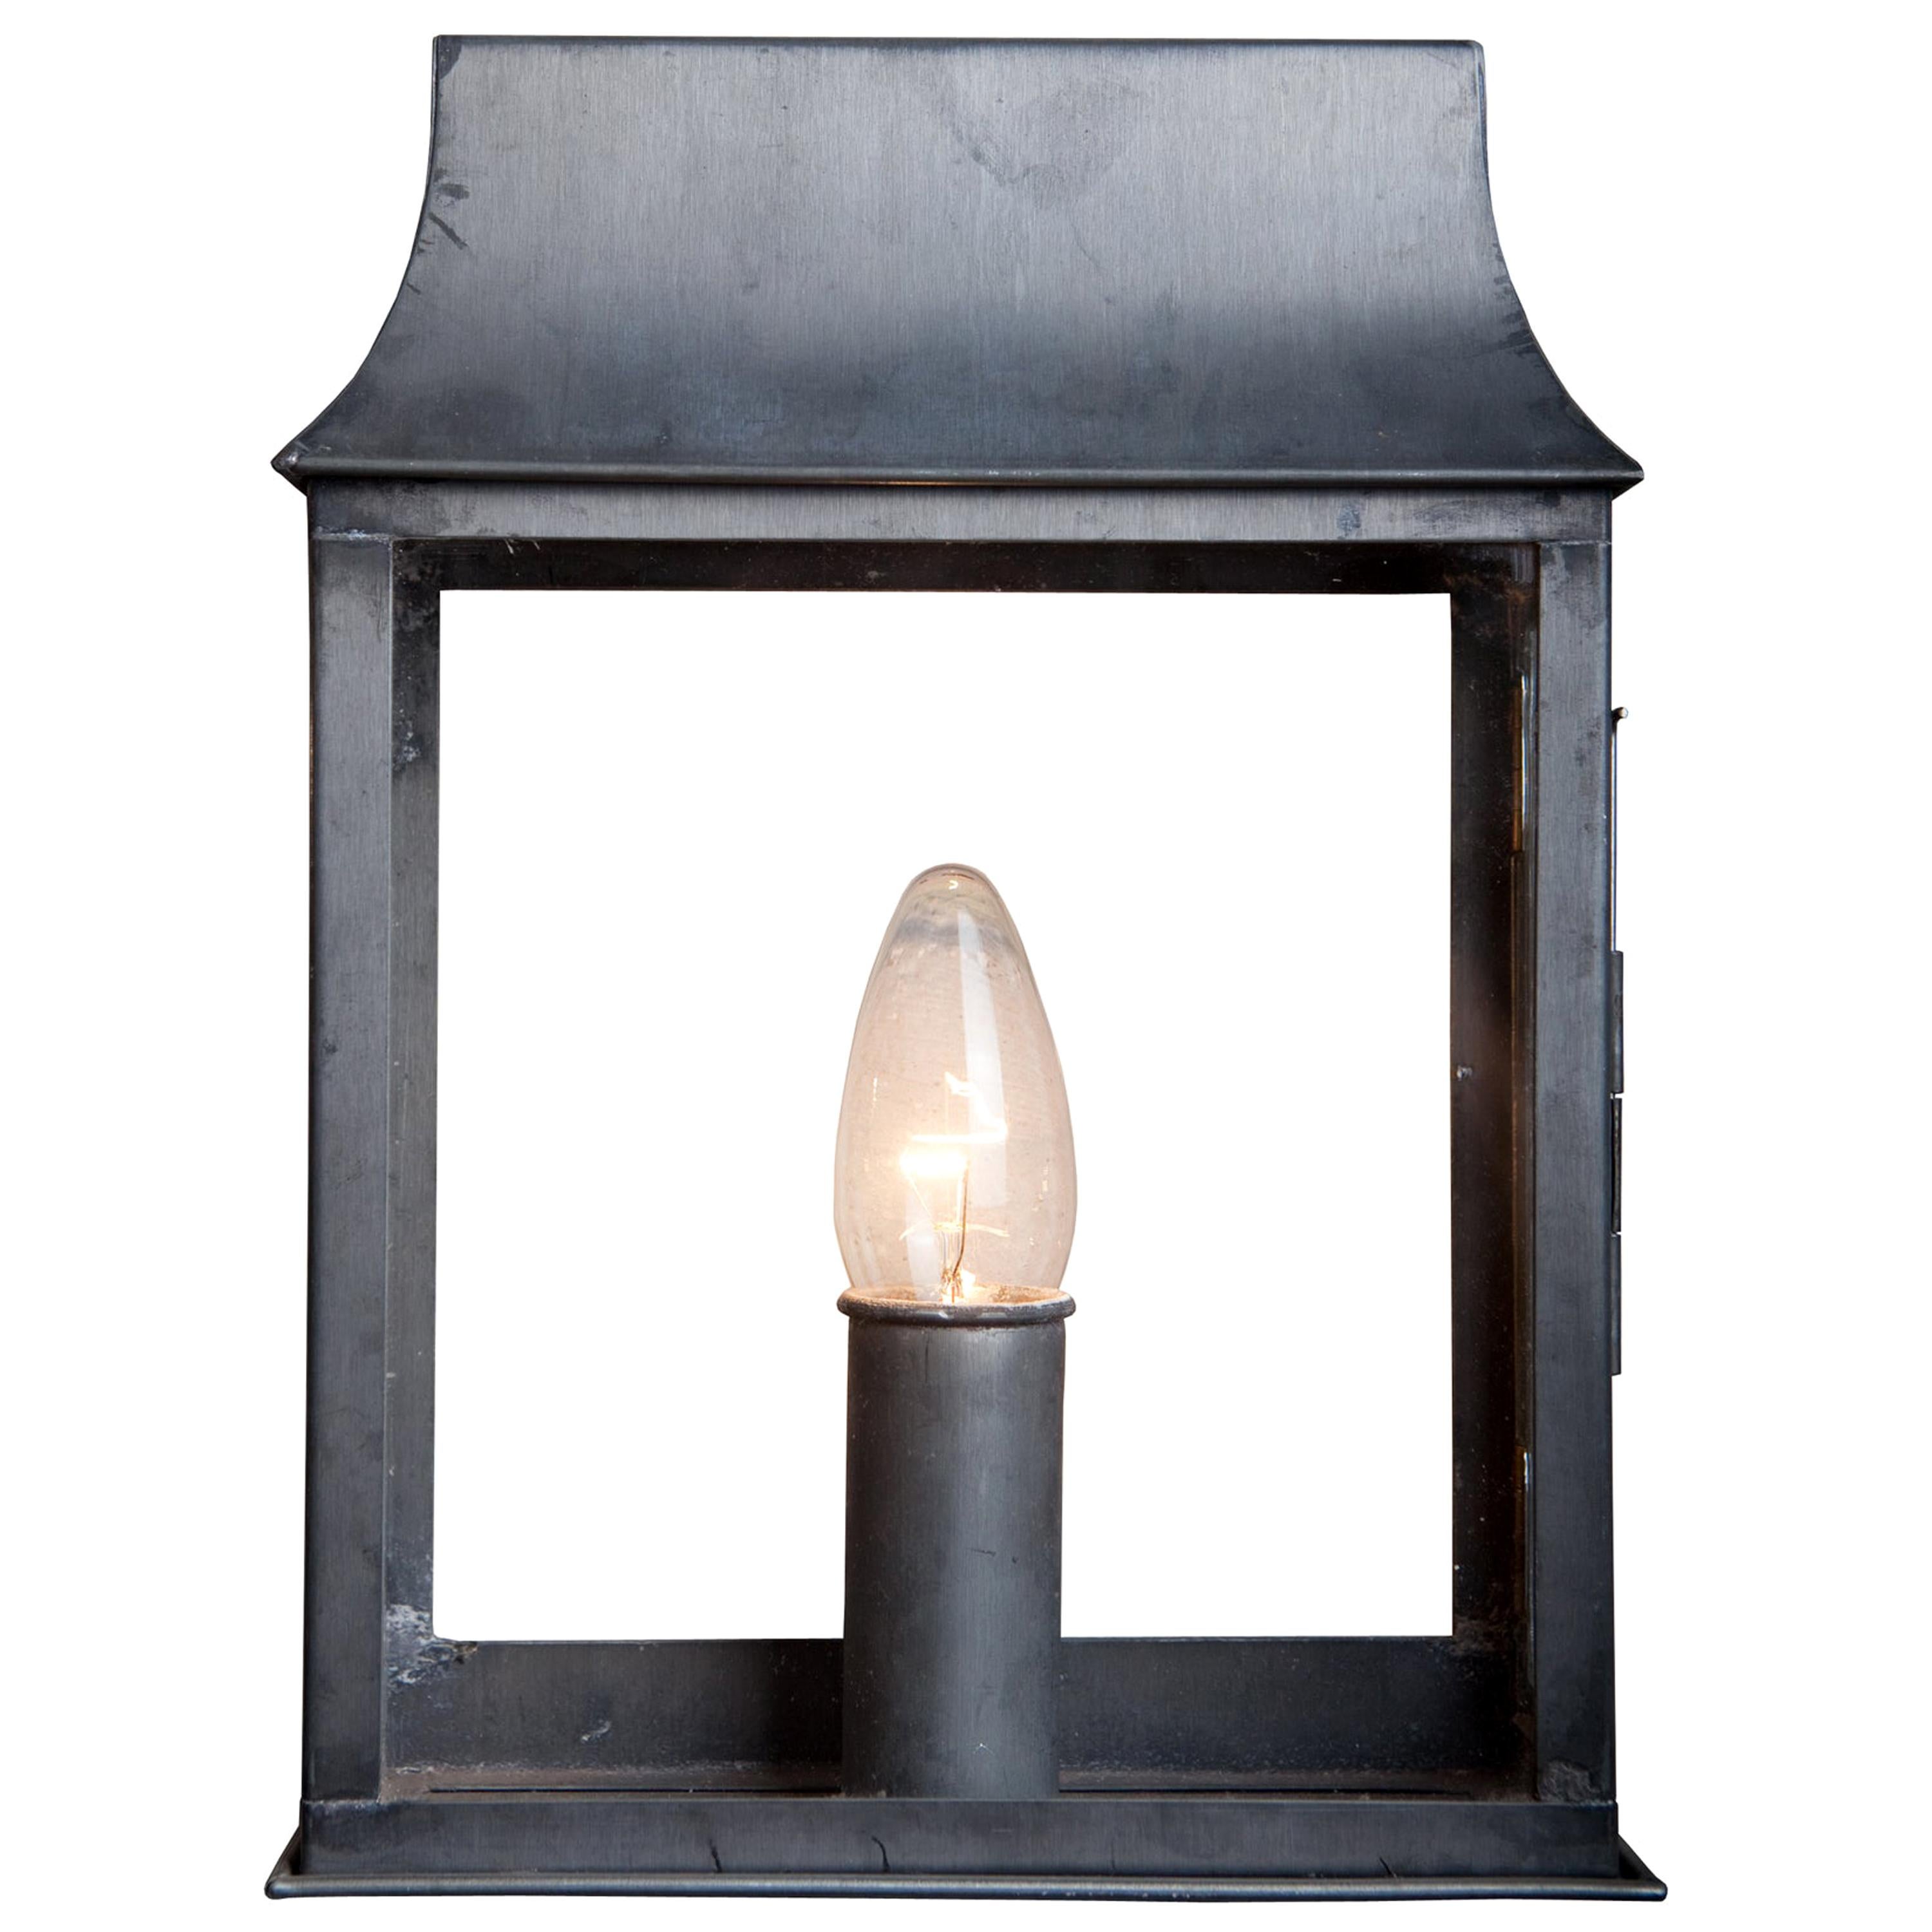 Candle House, Wall Luminaire in Zinc, for Outside or Inside by Atelier Boucquet For Sale